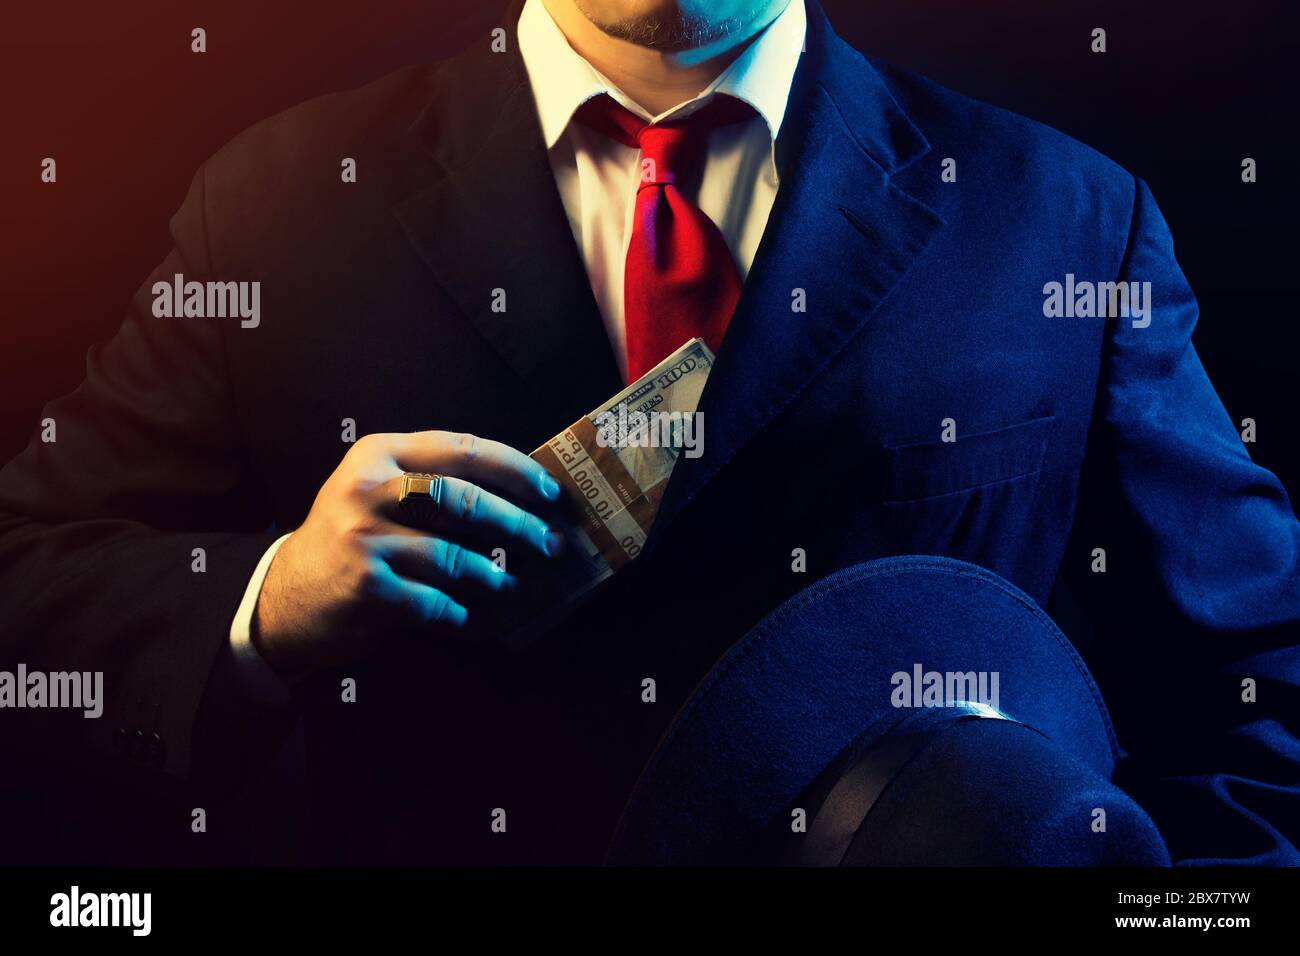 Mafia man in black suit, red tie putting money in pocket on black background. Stock Photo